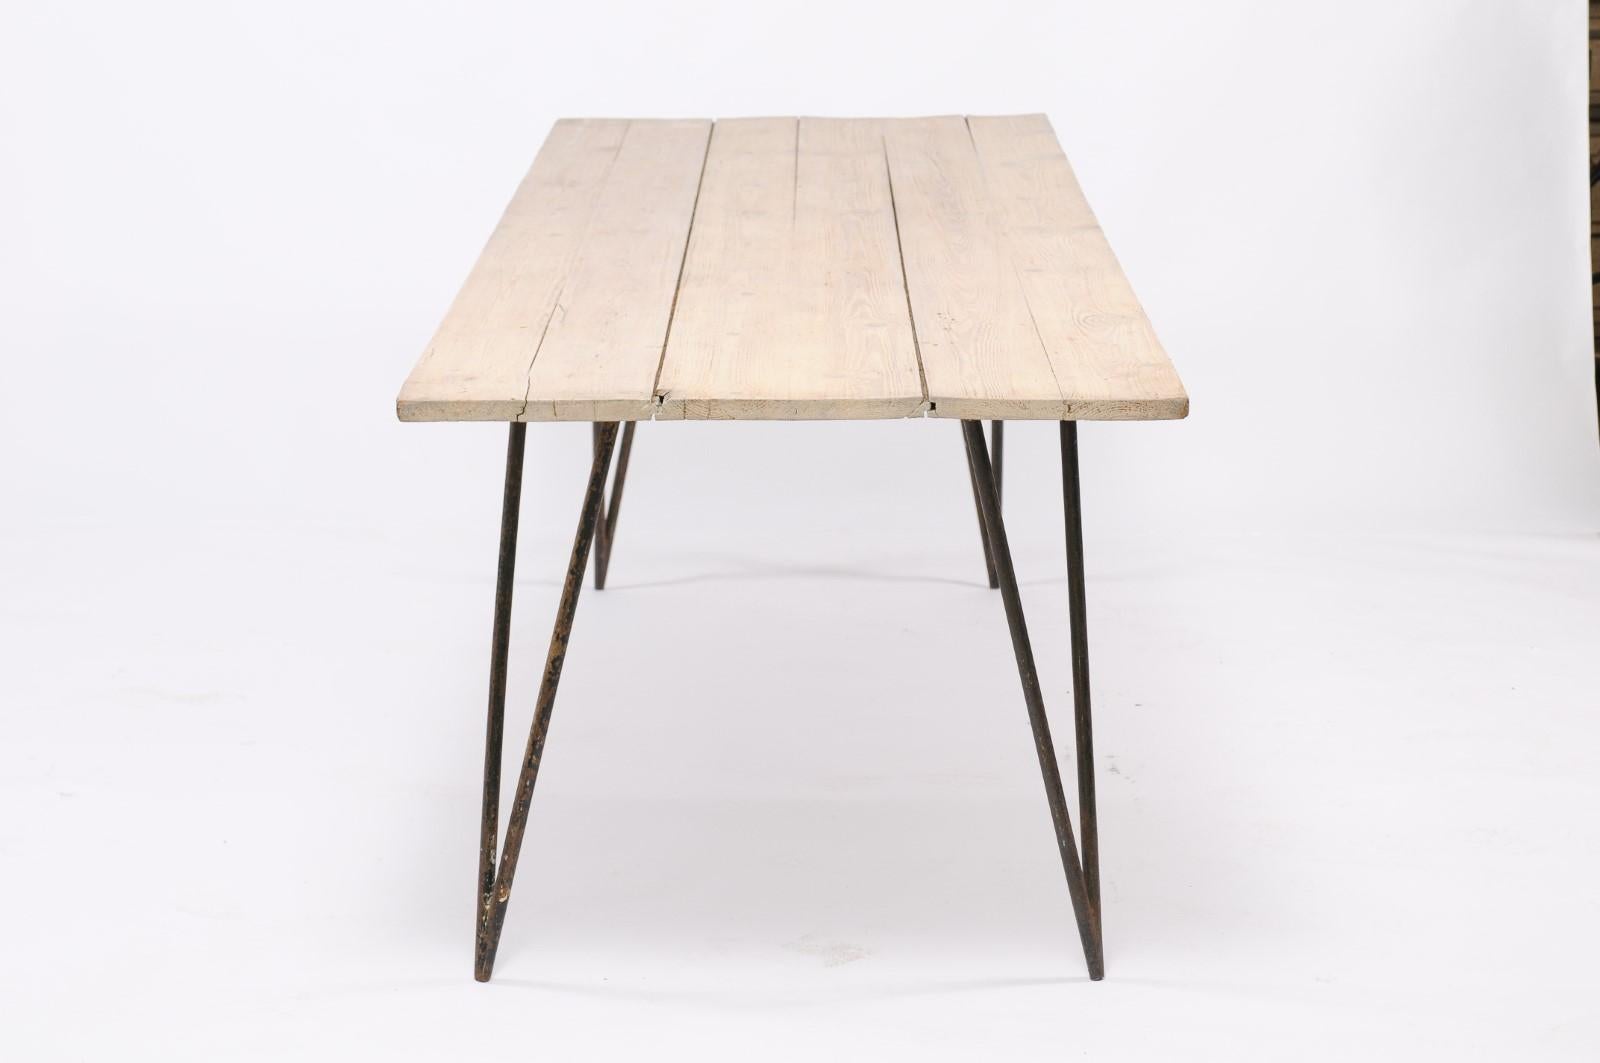 1960s Painted Pine Dining Table with Iron Legs 2